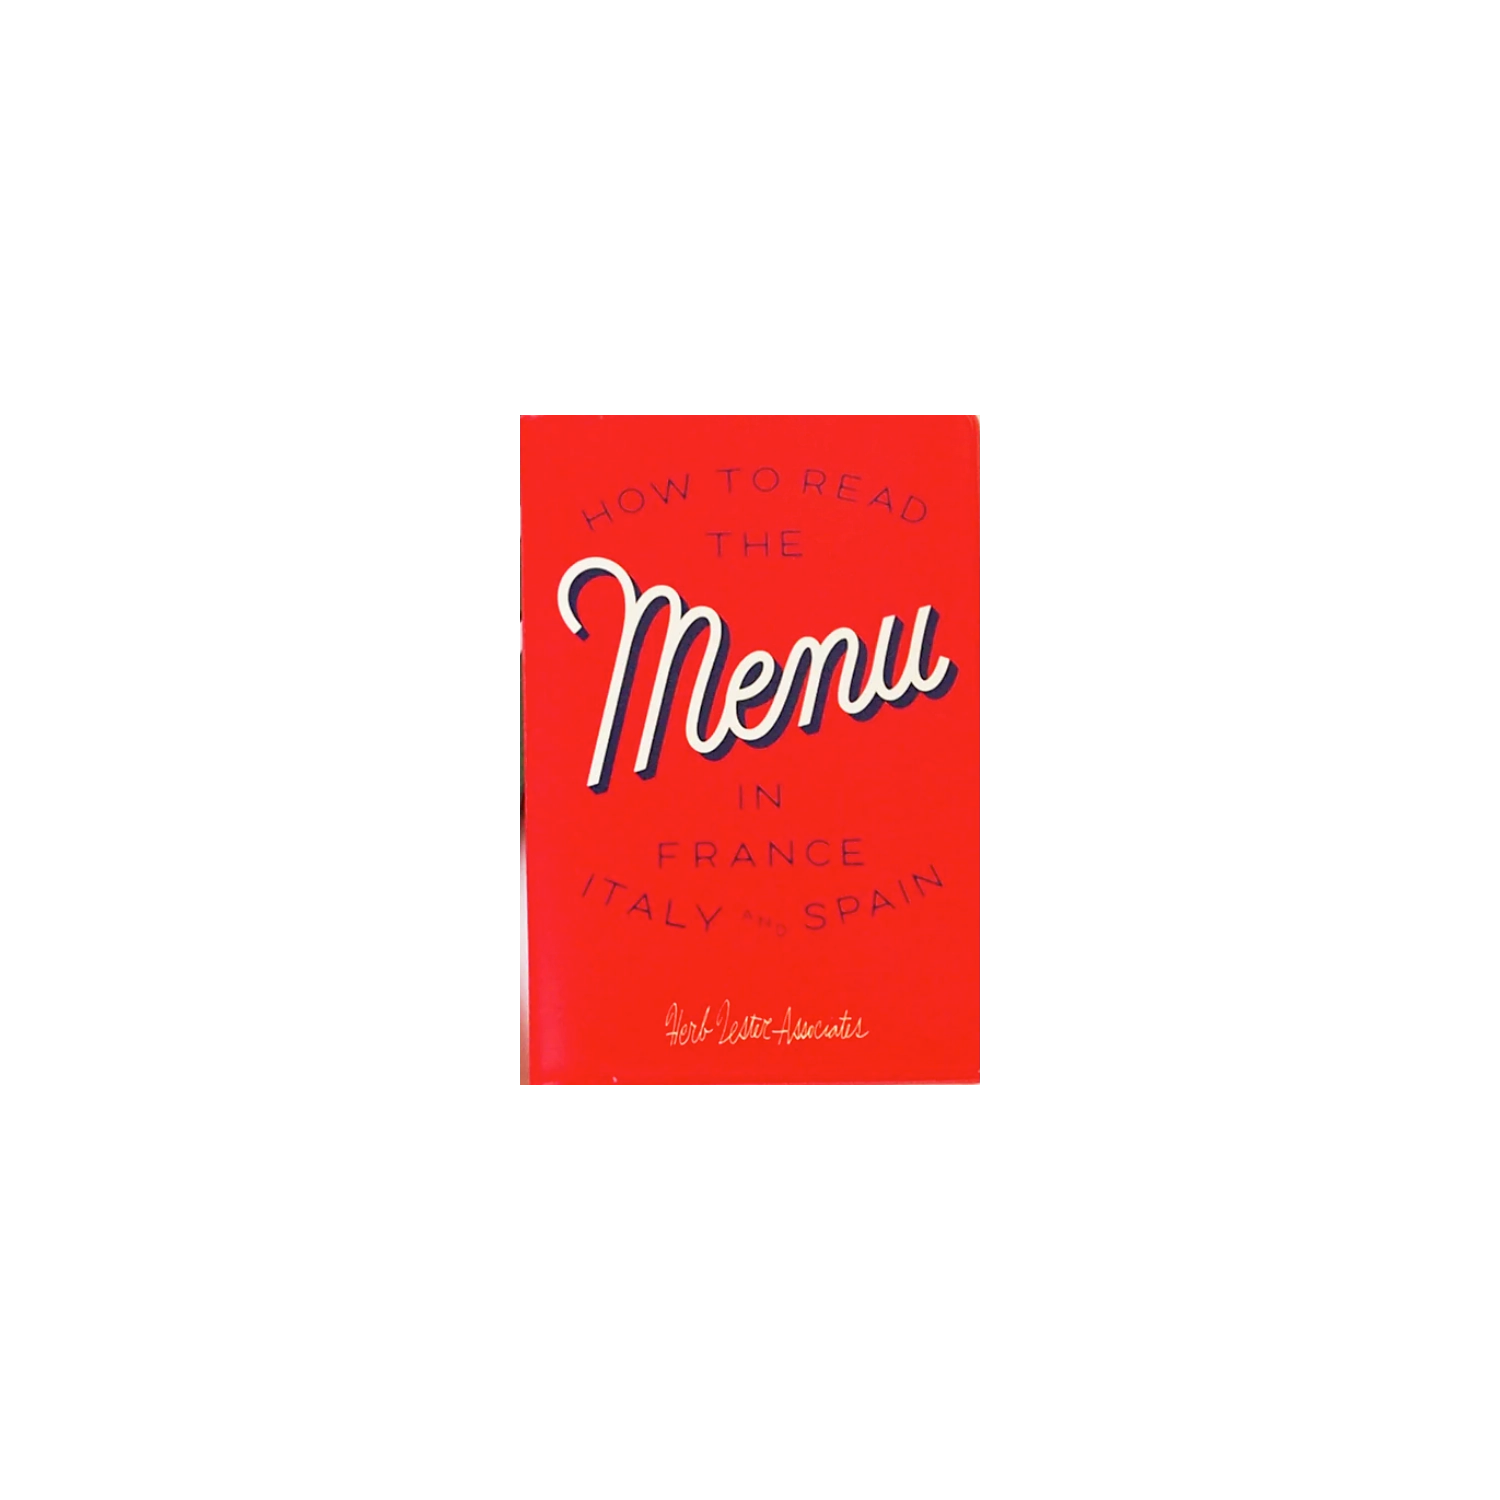 How to read the Menu in France, Italy and Spain